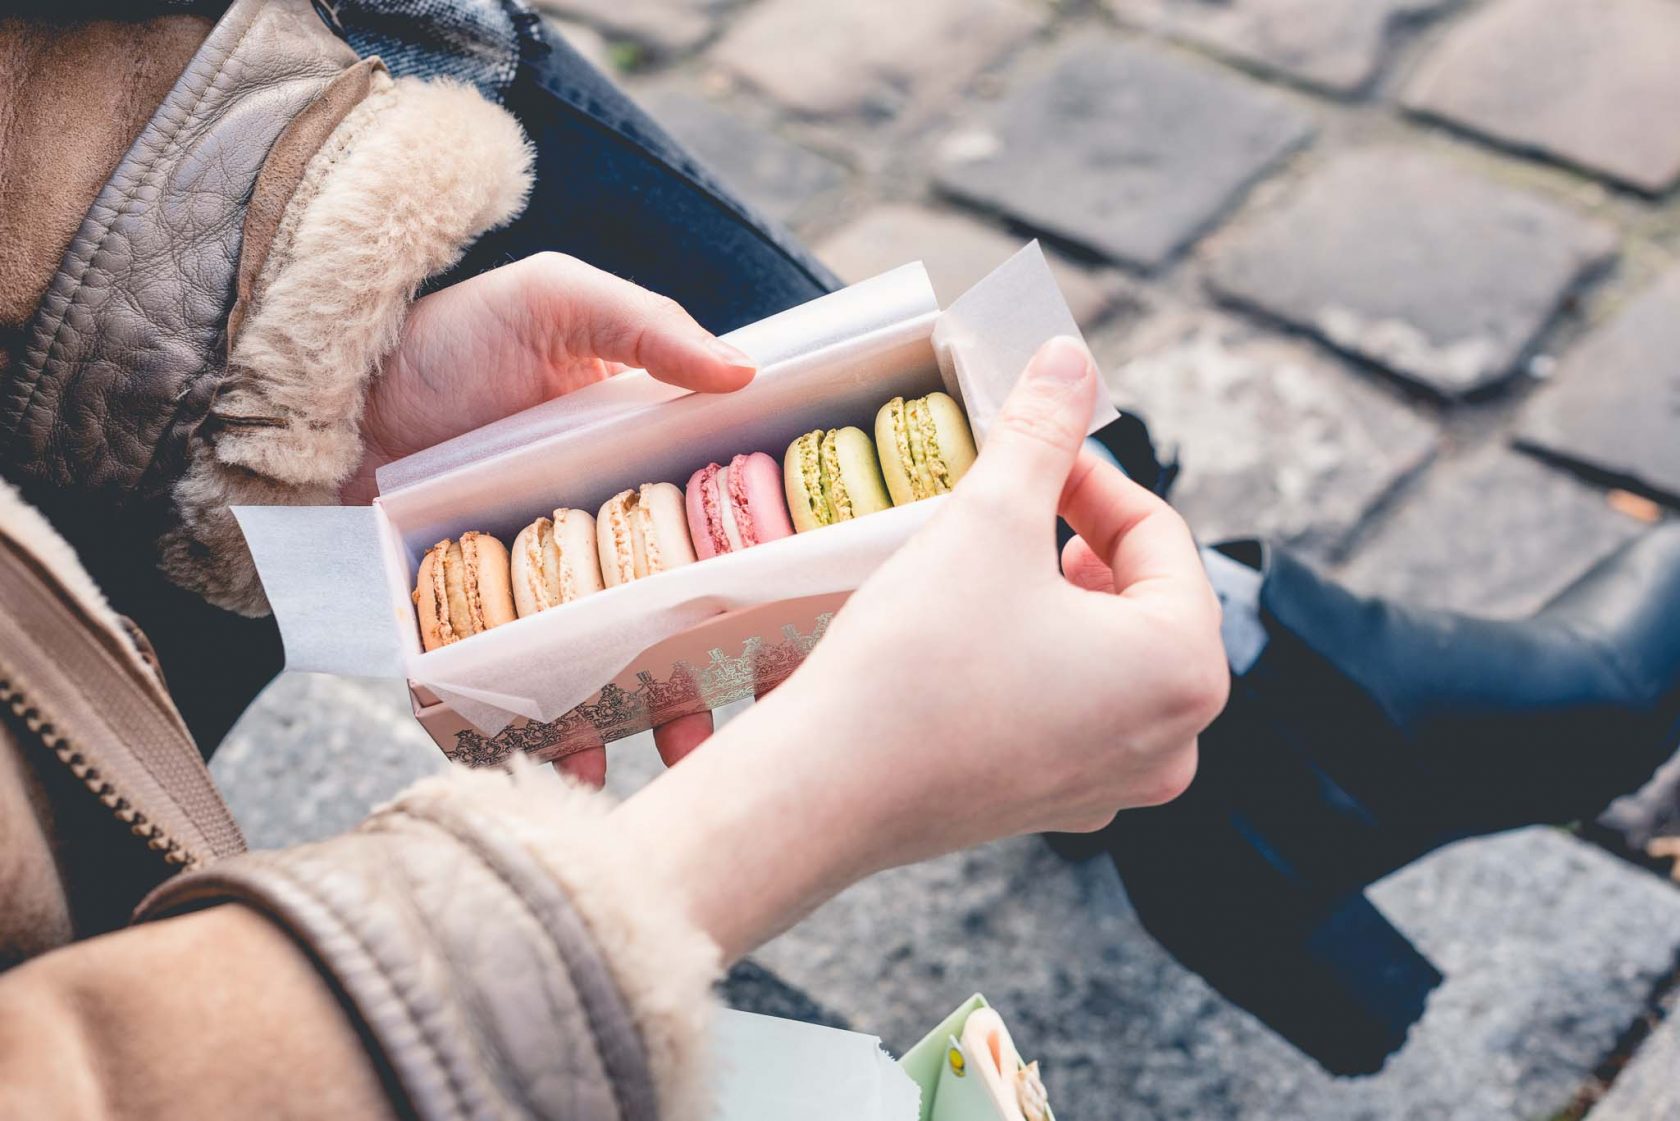 Paige Gribb Photography in Paris, France: lifestyle photo of woman's hands holding box of Ladurée macarons